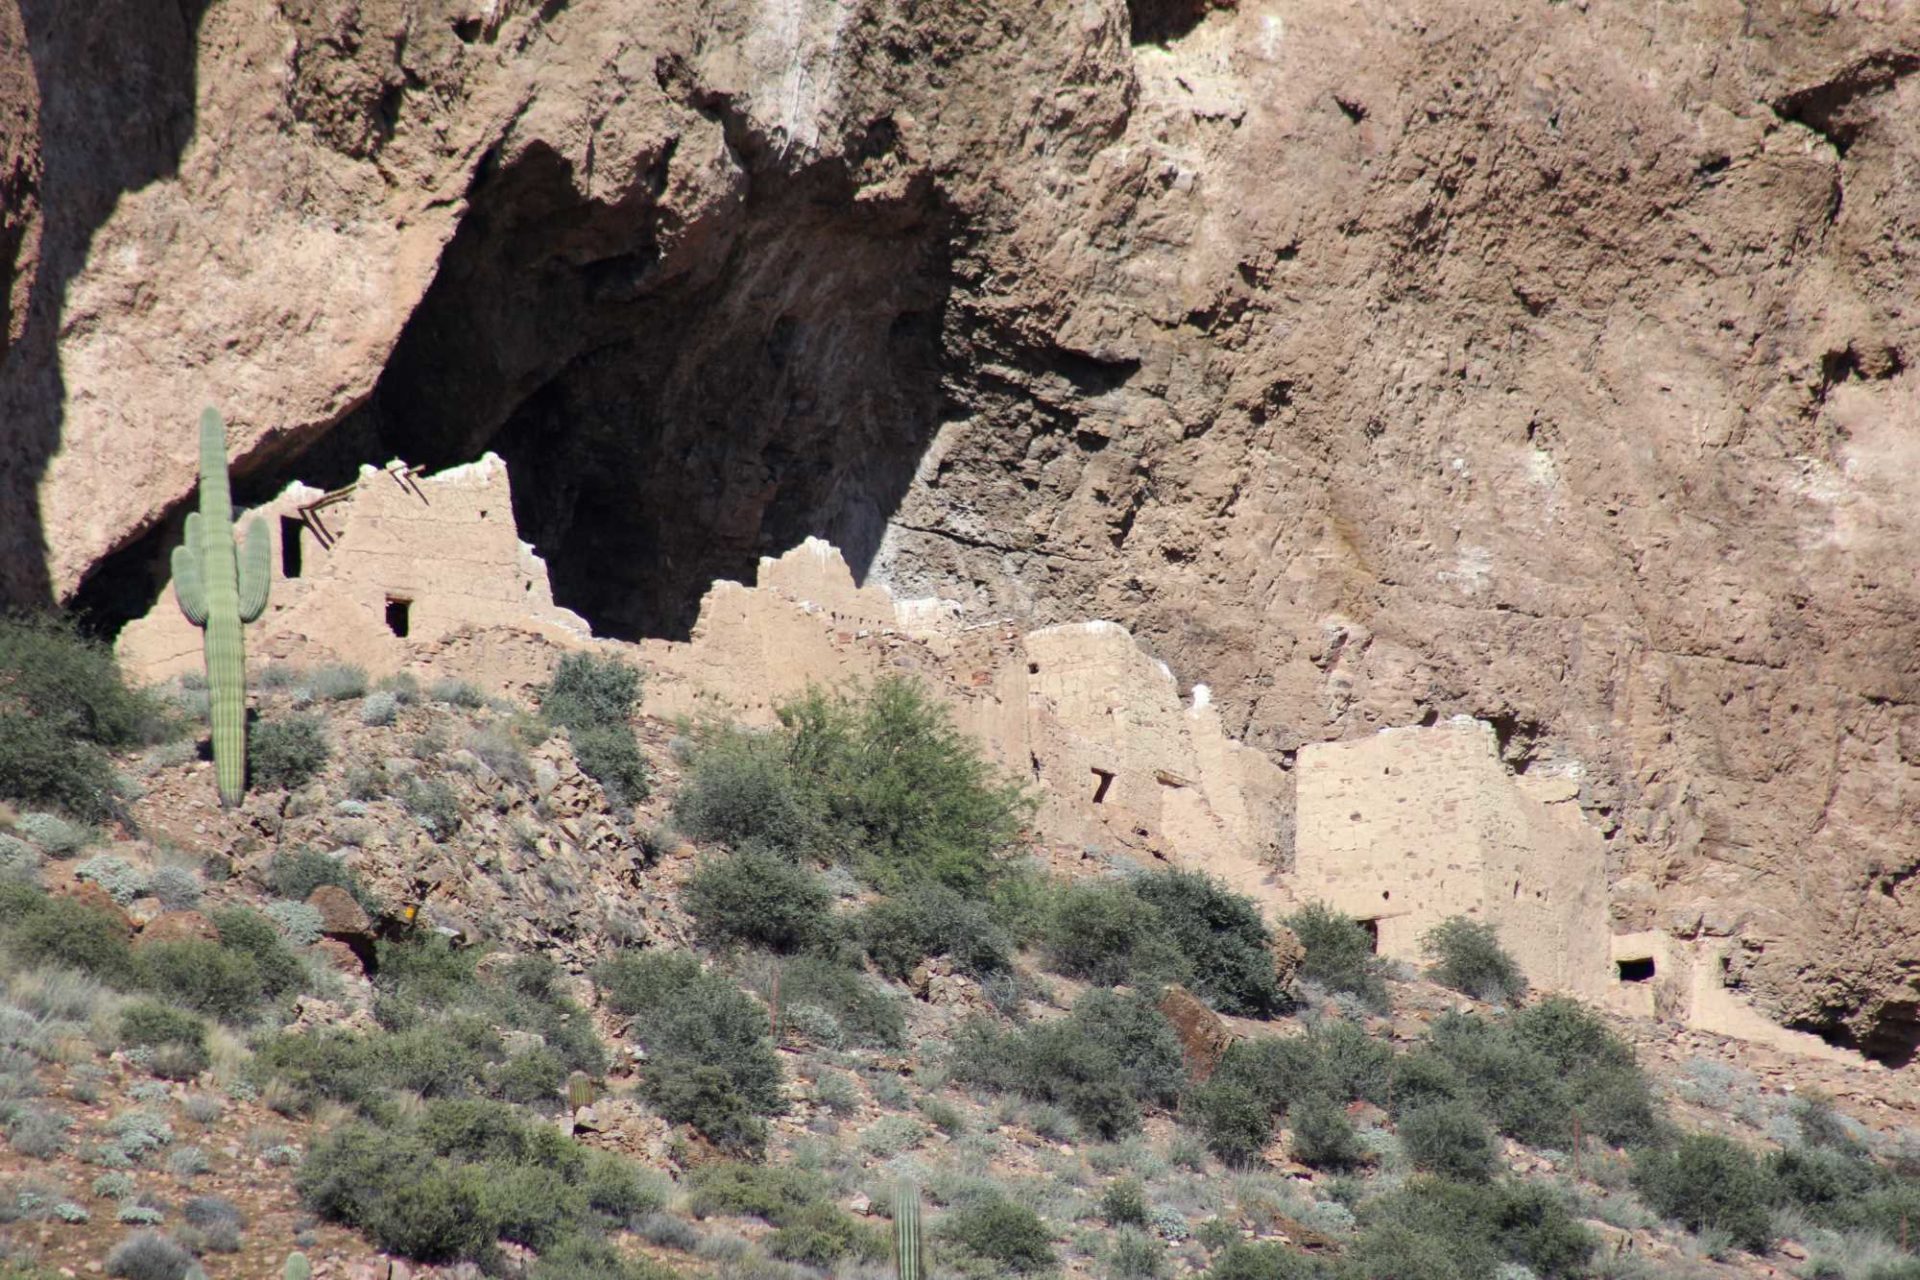 The Upper Cliff Dwelling from afar. Image: NPS